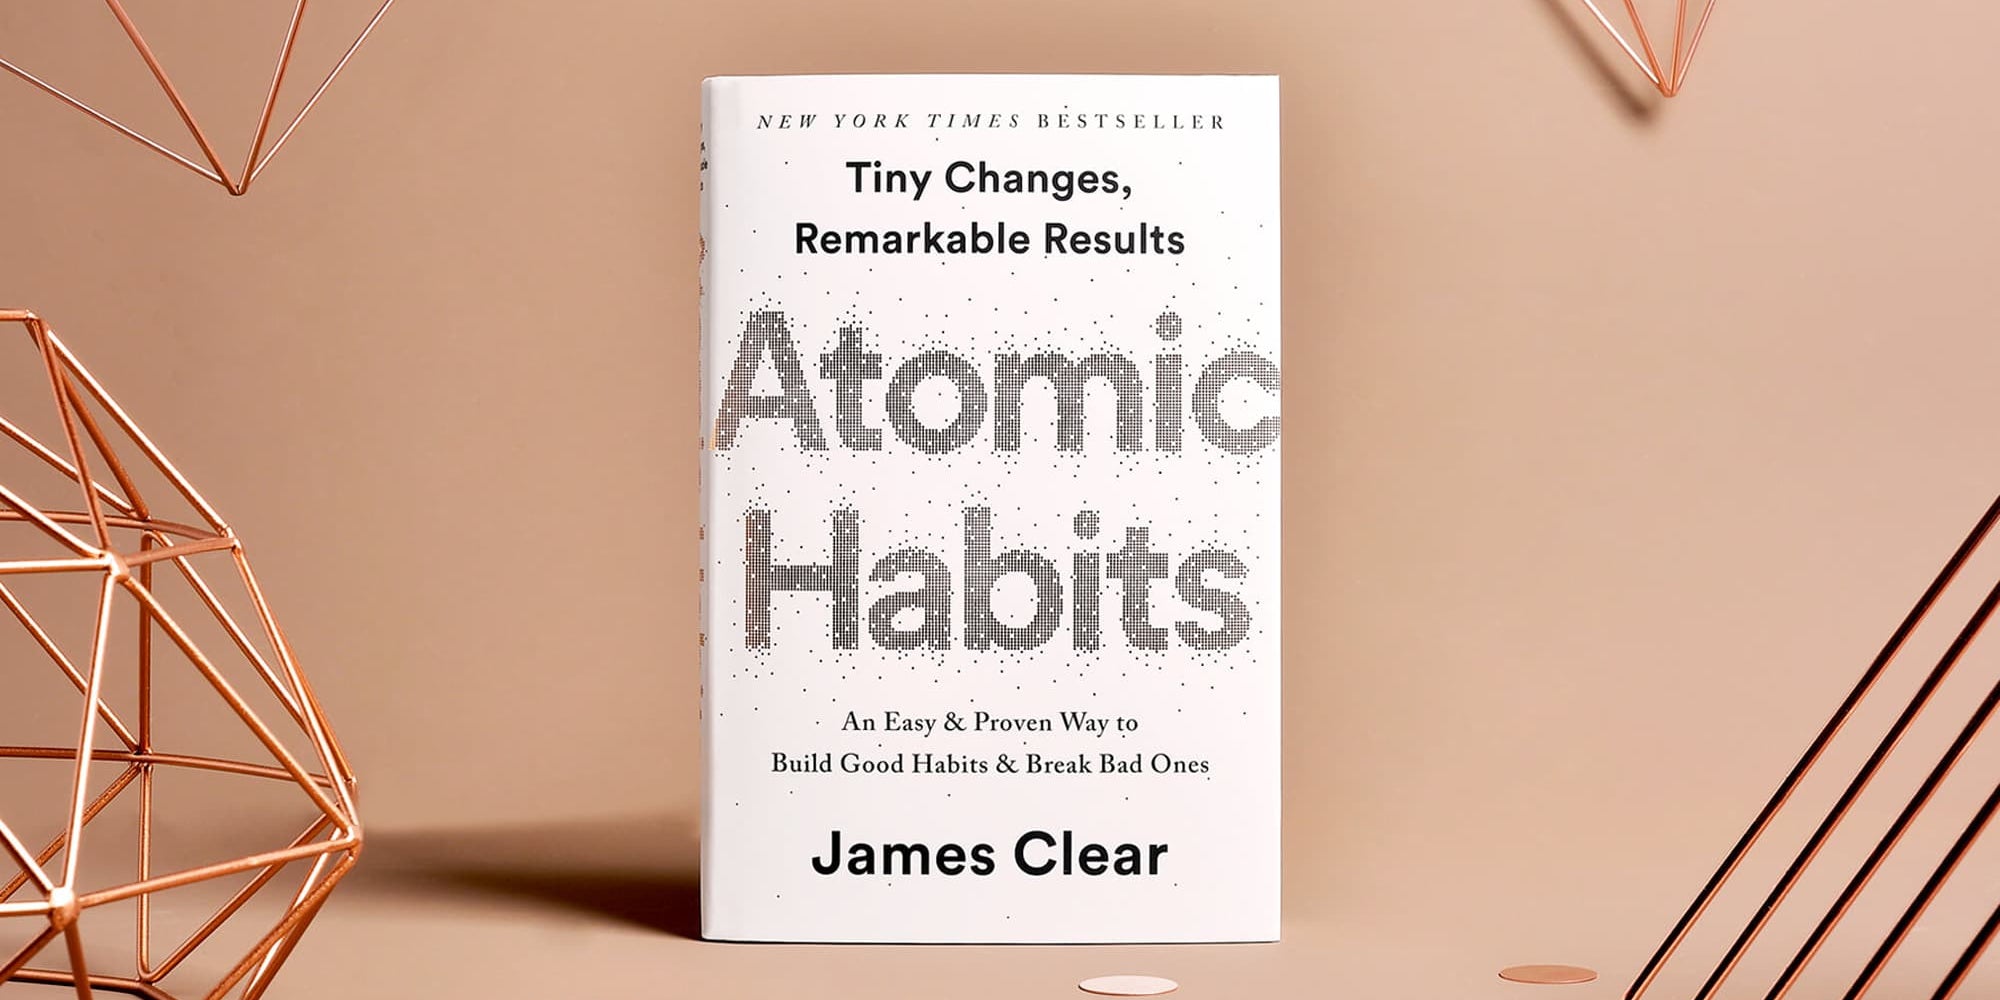 5 Key Lessons from Atomic Habits